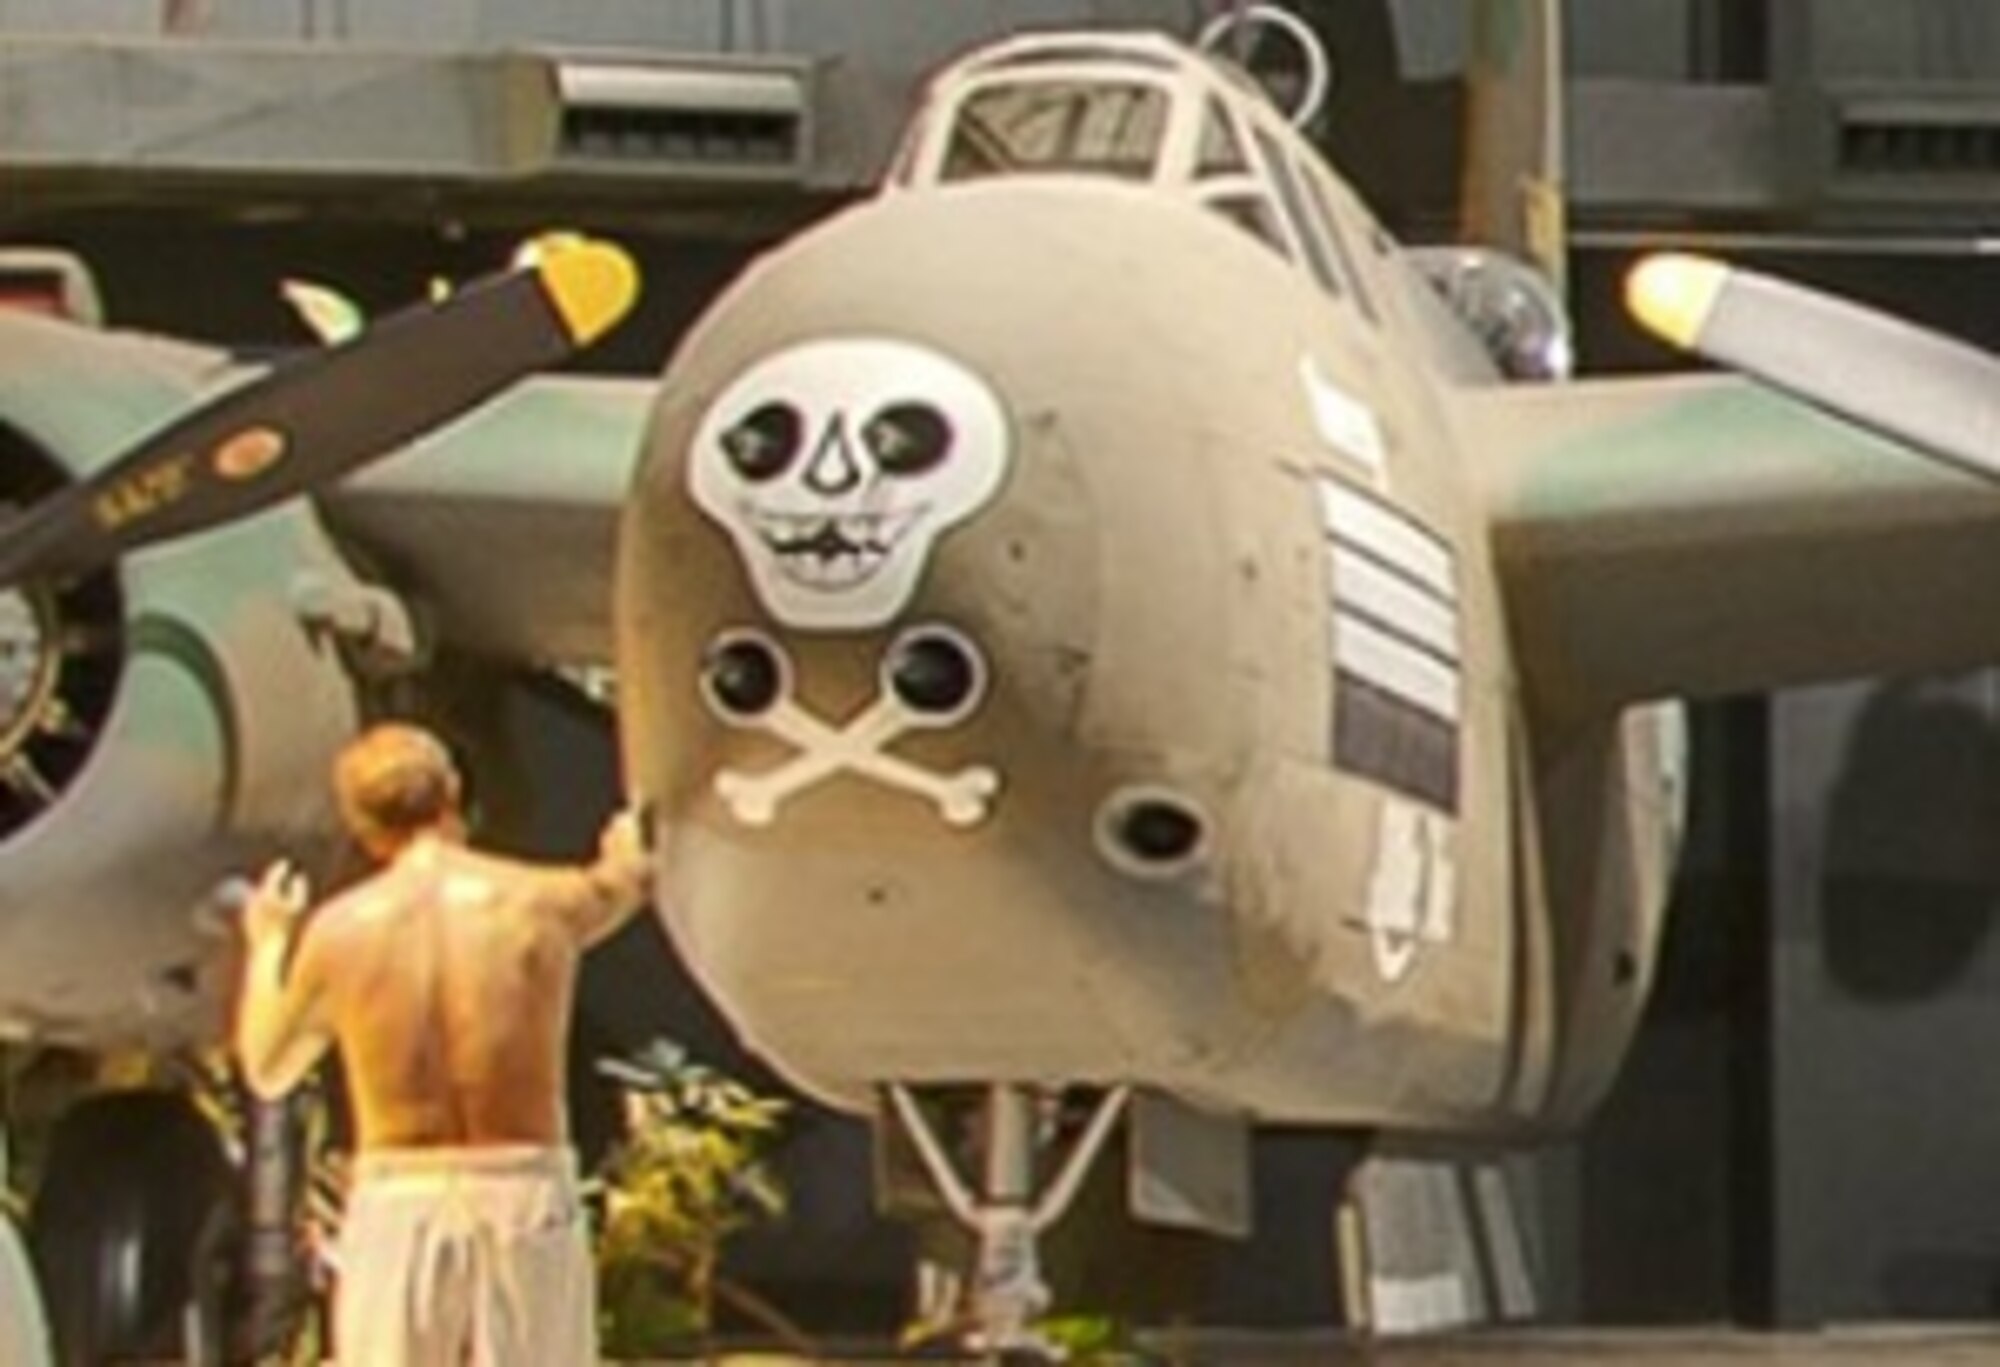 WORLD WAR II GALLERY - On a tropical island, find a skull and cross bones. (Screenshot from NMUSAF Virtual Tour)